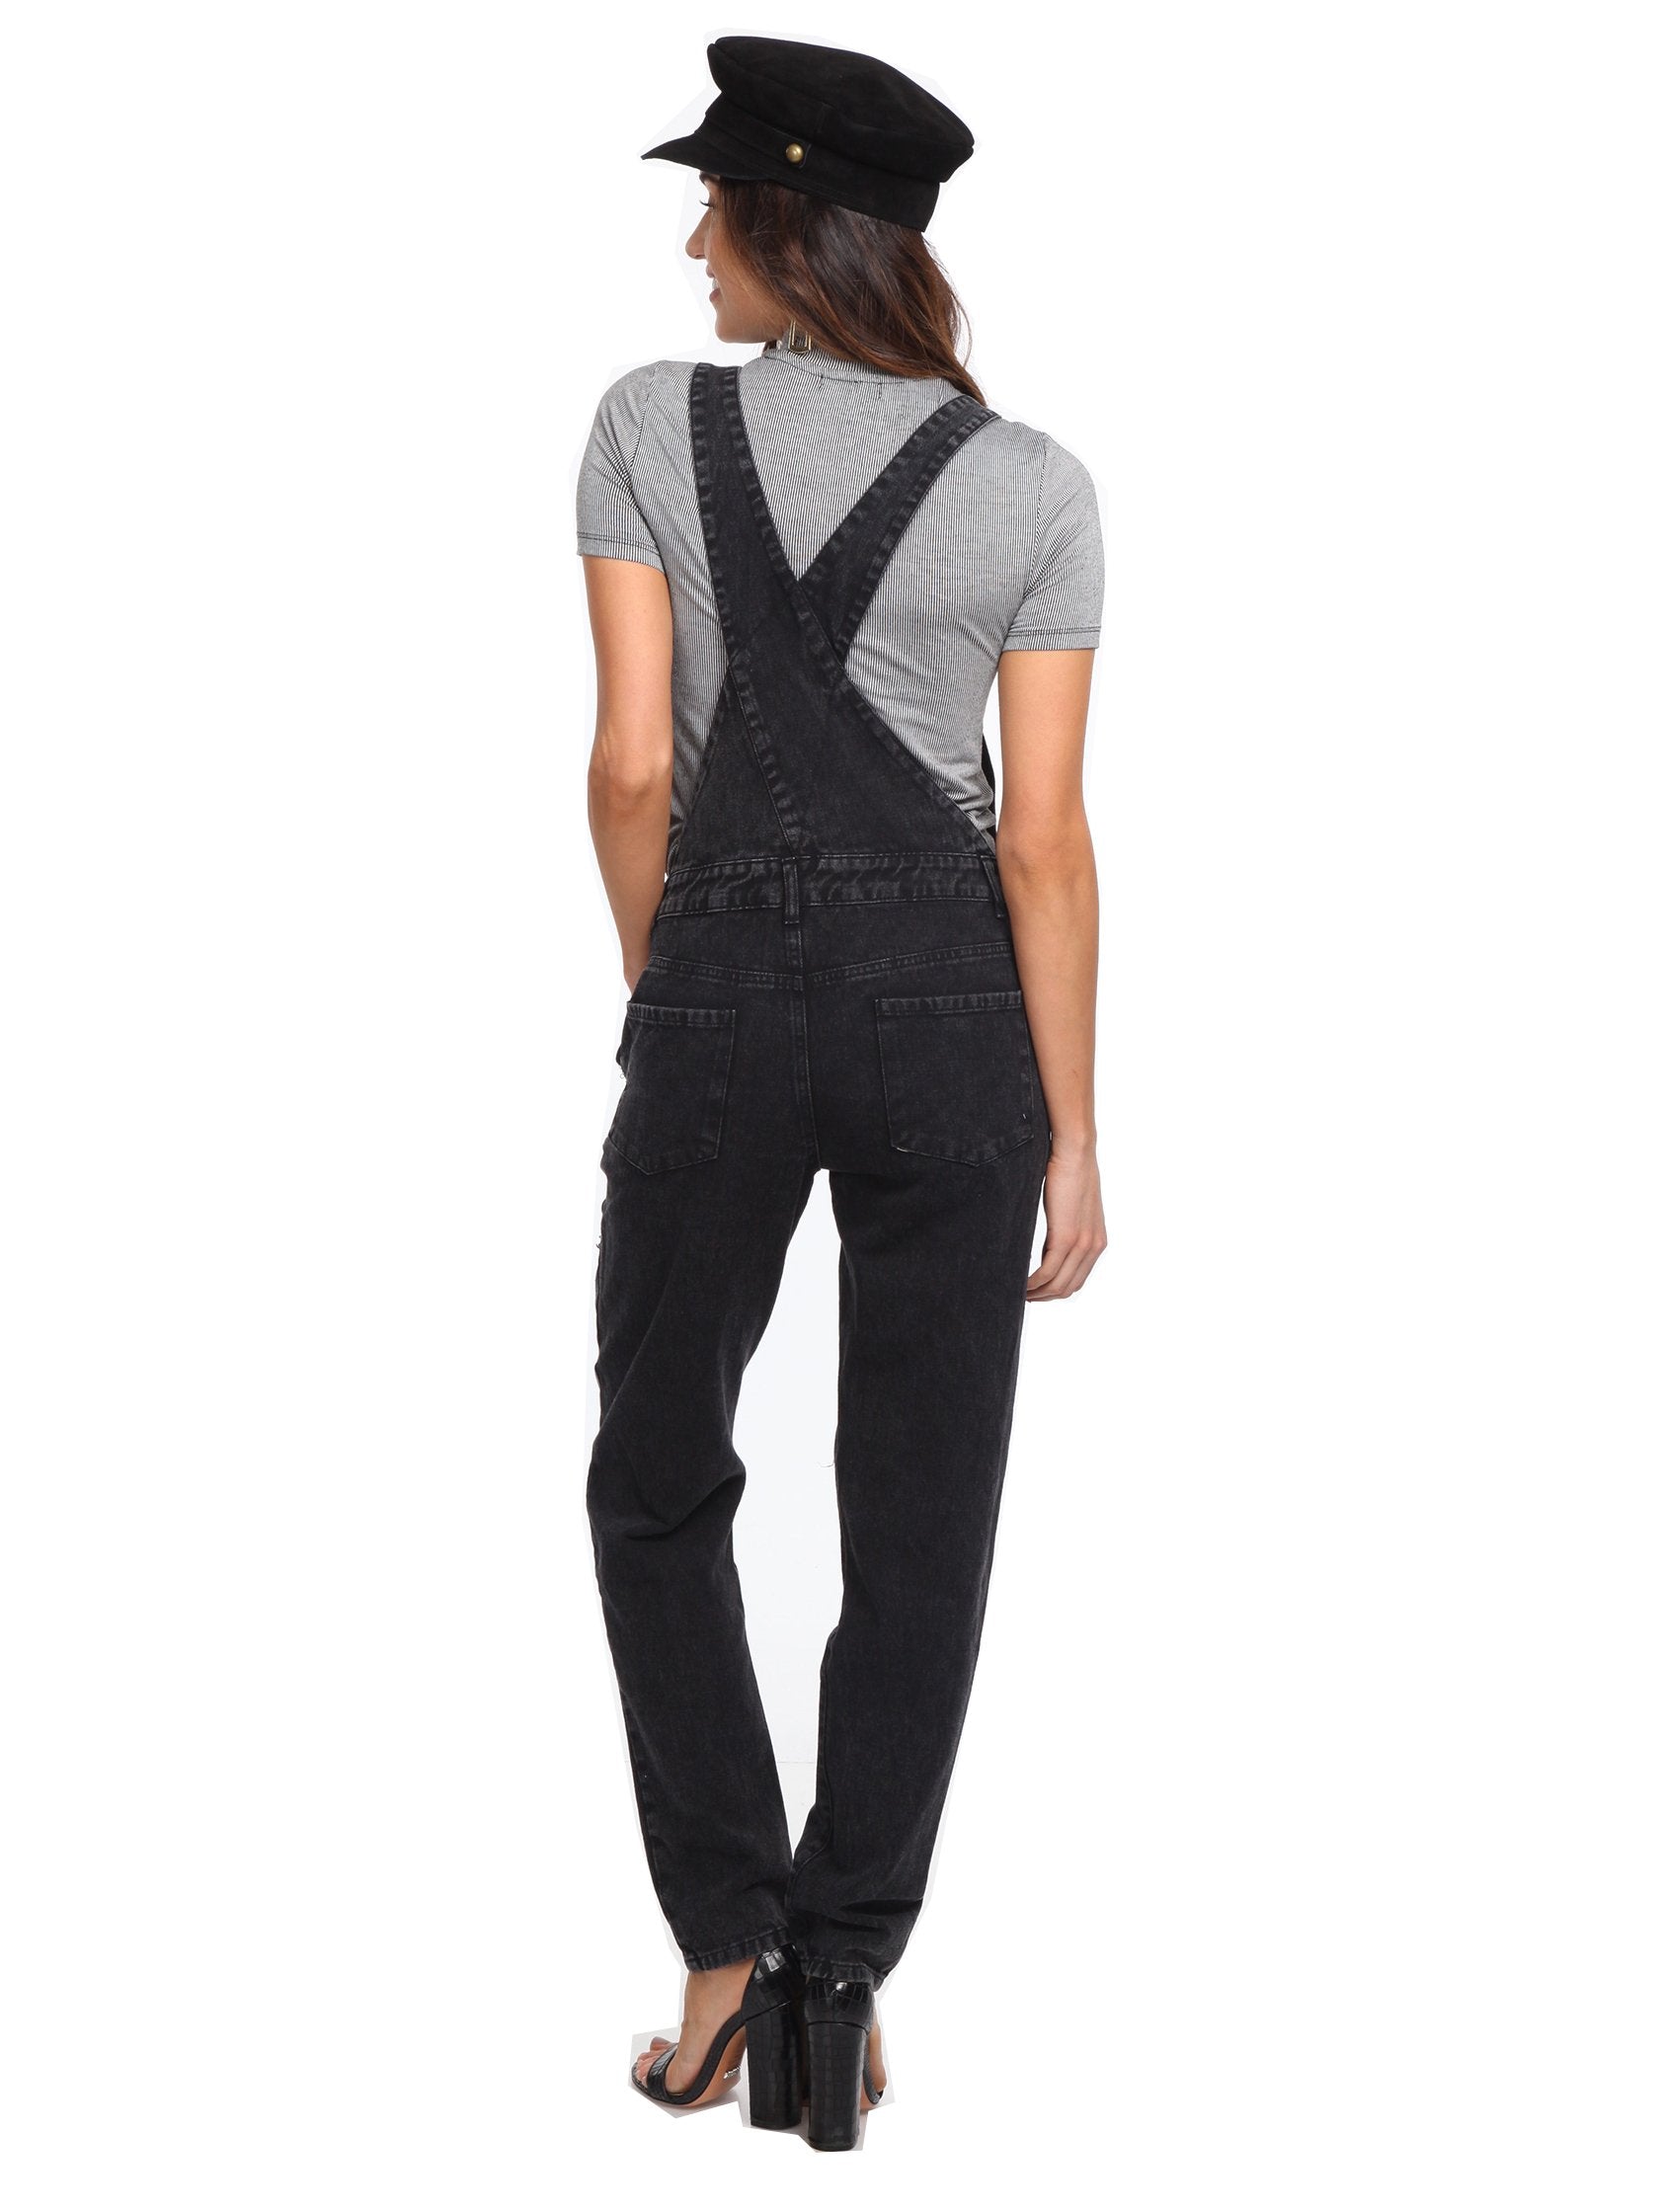 Girl outfit in a jumpsuit rental from FashionPass called Here For A Good Time Overalls